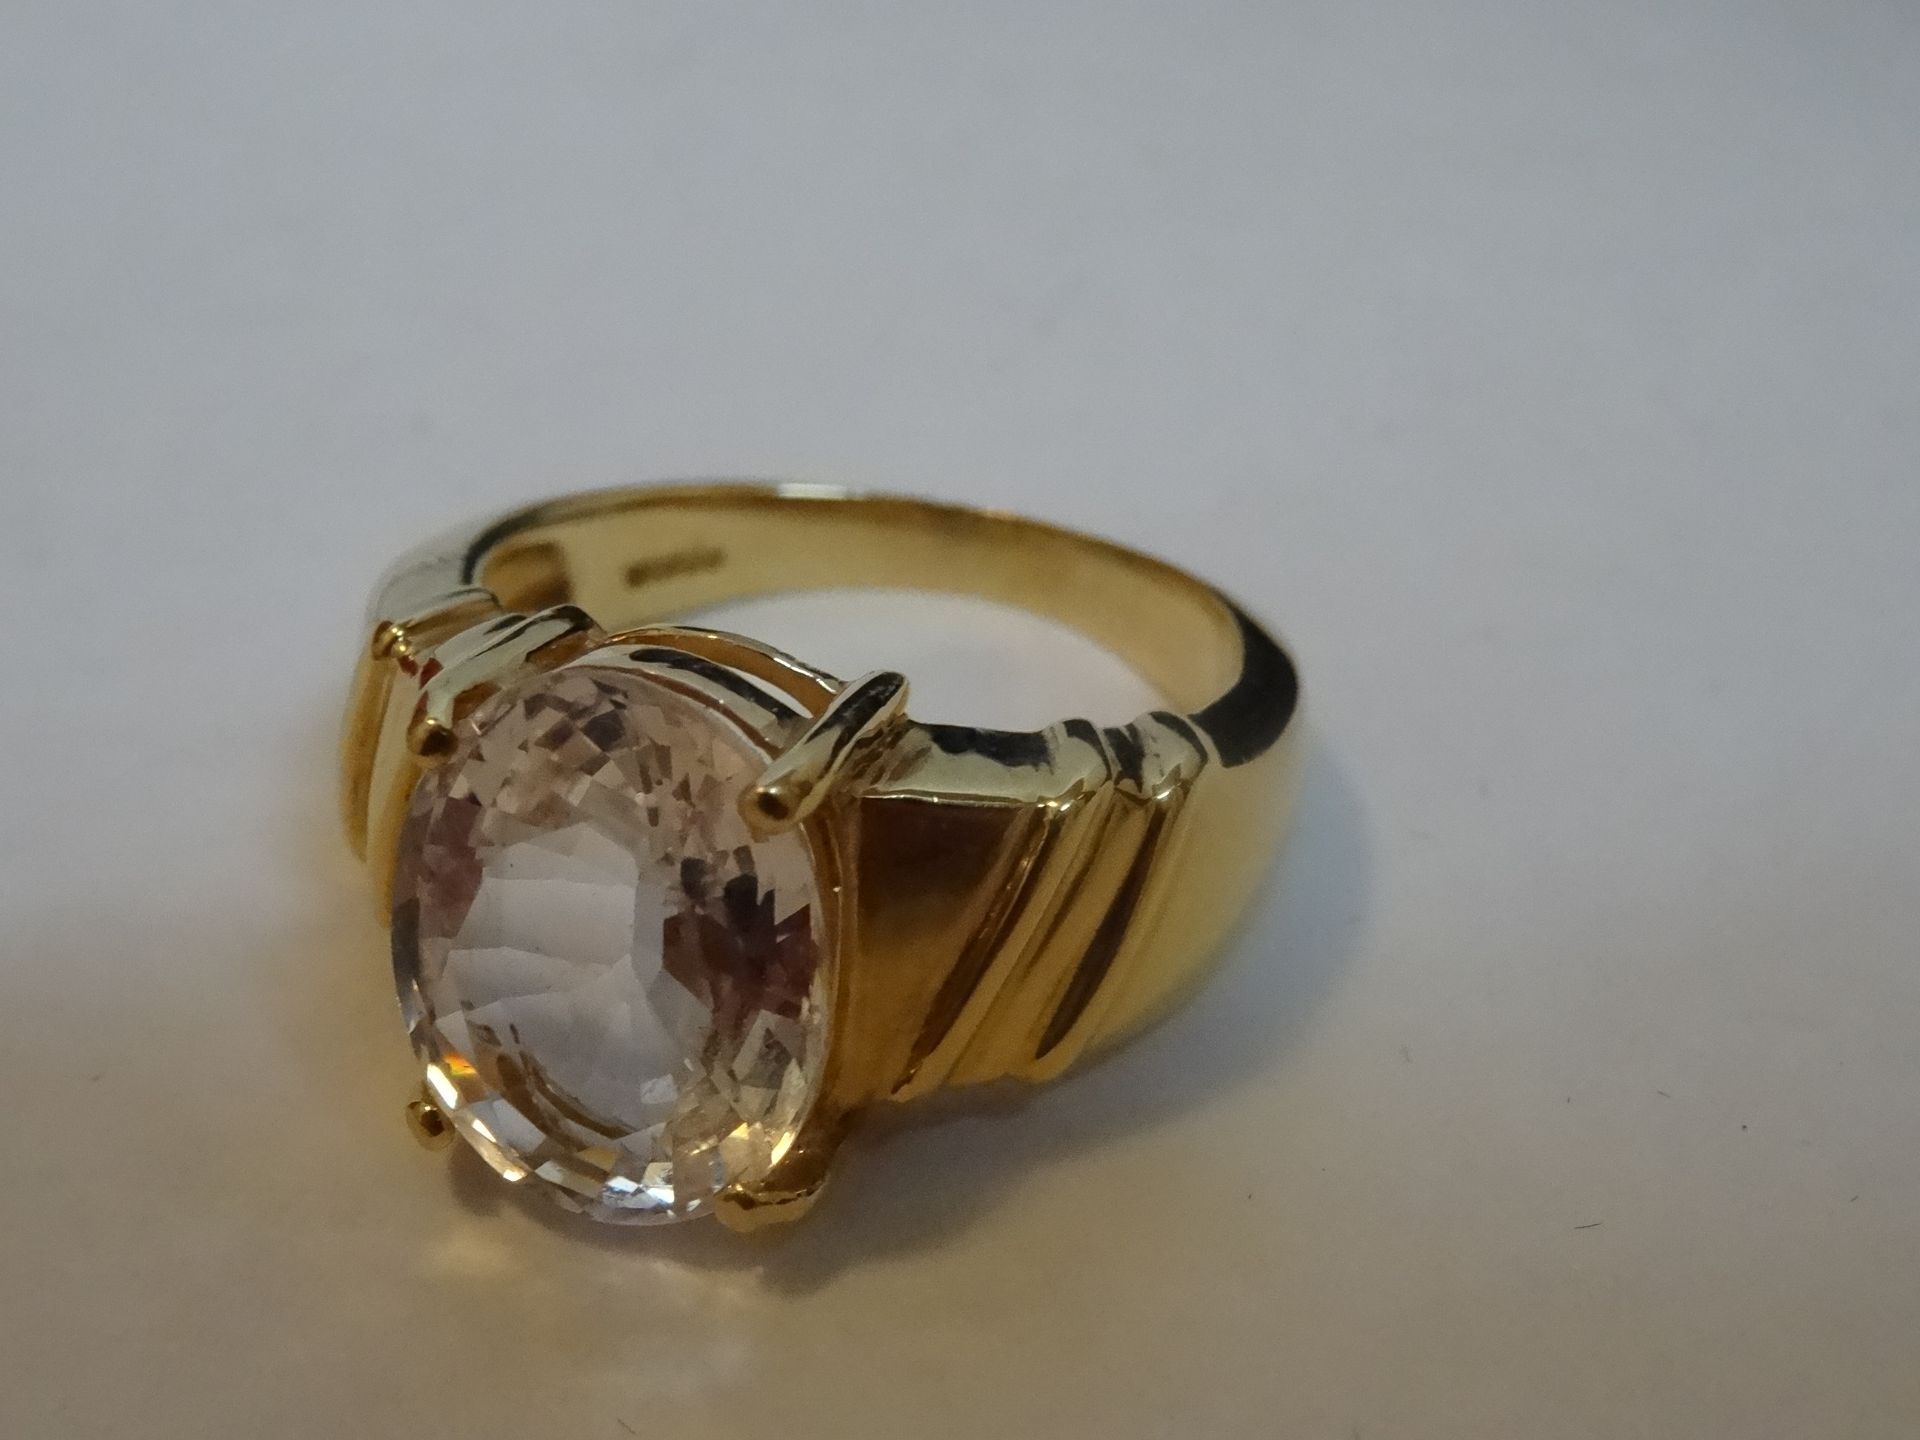 18 Carat Yellow Gold Ring With Clear Stone Ring. Total Piece Weight 8.6 Grams